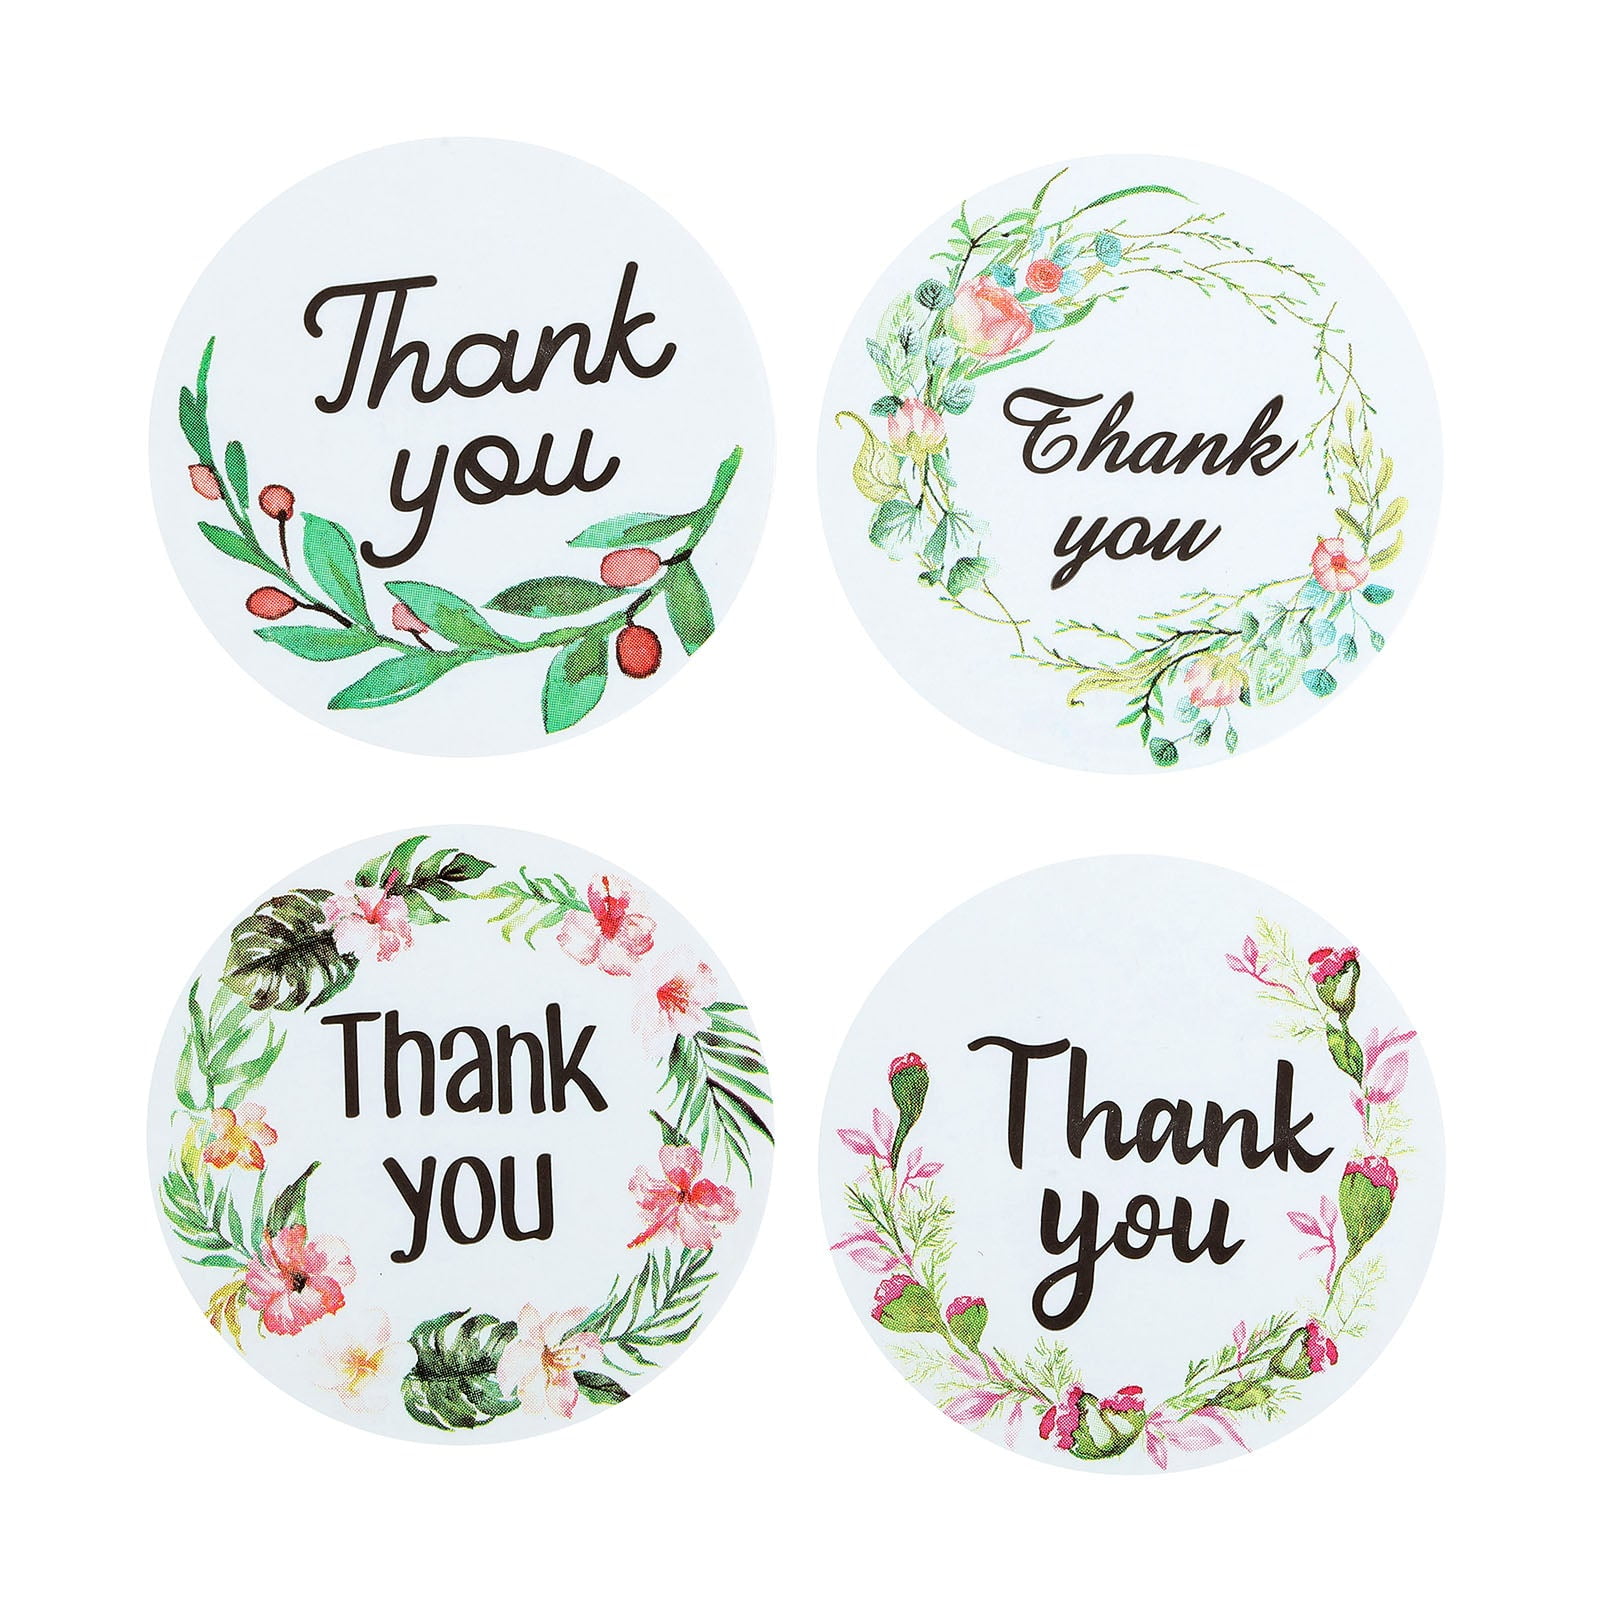 Thank You Stickers Roll 500pcs 1.5 Inch,Thank You Small Business Stickers 8 Floral Designs,Personalized Custom Stickers Labels for Thank You Card,Package,Birthday Party,Bakery,Envelope Seals. 